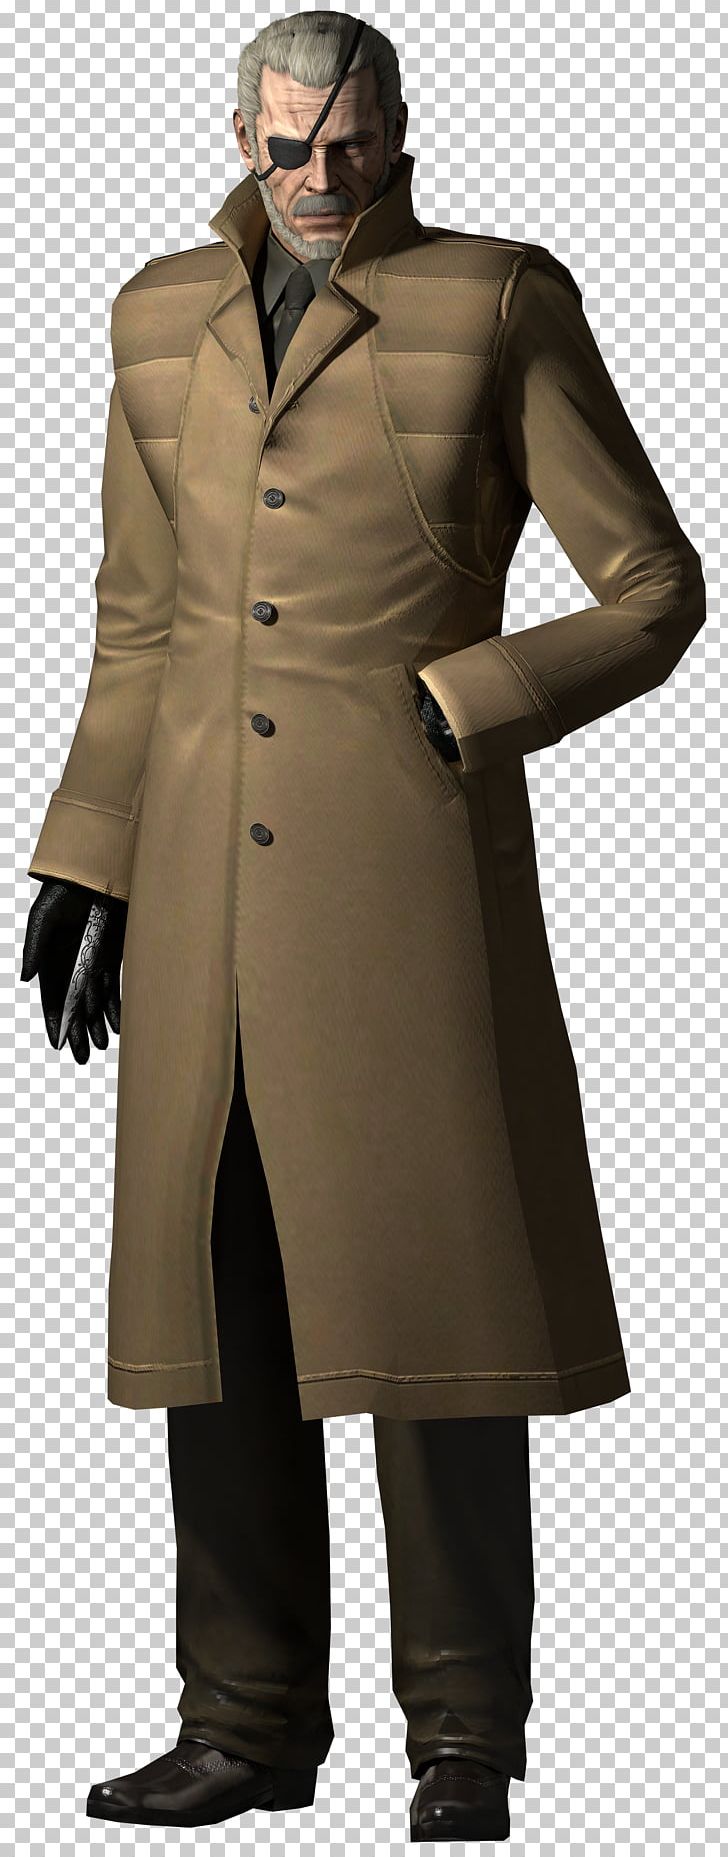 Metal Gear Solid 4: Guns Of The Patriots Metal Gear Solid V: The Phantom Pain Metal Gear 2: Solid Snake PNG, Clipart, Boss, Formal Wear, Foxhound, Gaming, Gentleman Free PNG Download